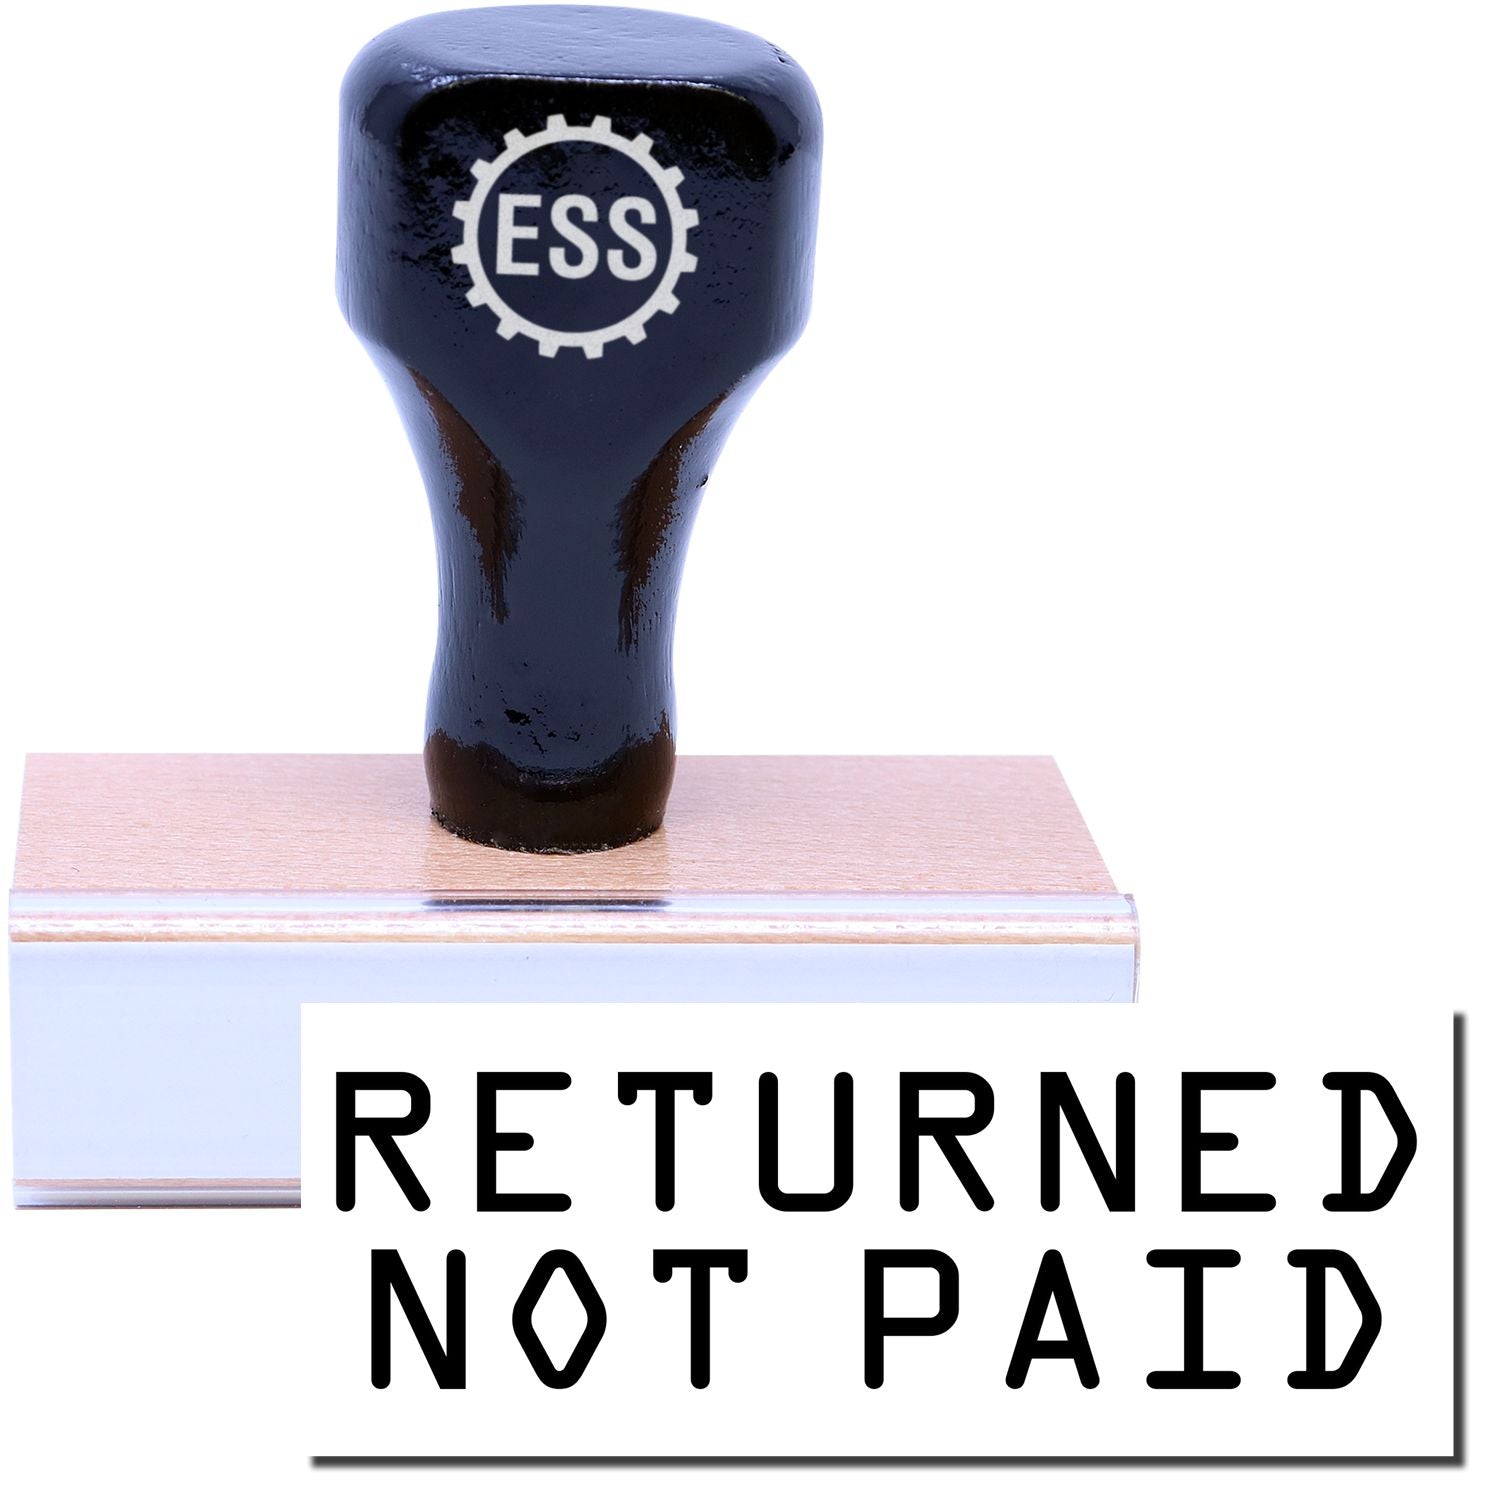 A stock office rubber stamp with a stamped image showing how the text "RETURNED NOT PAID" is displayed after stamping.